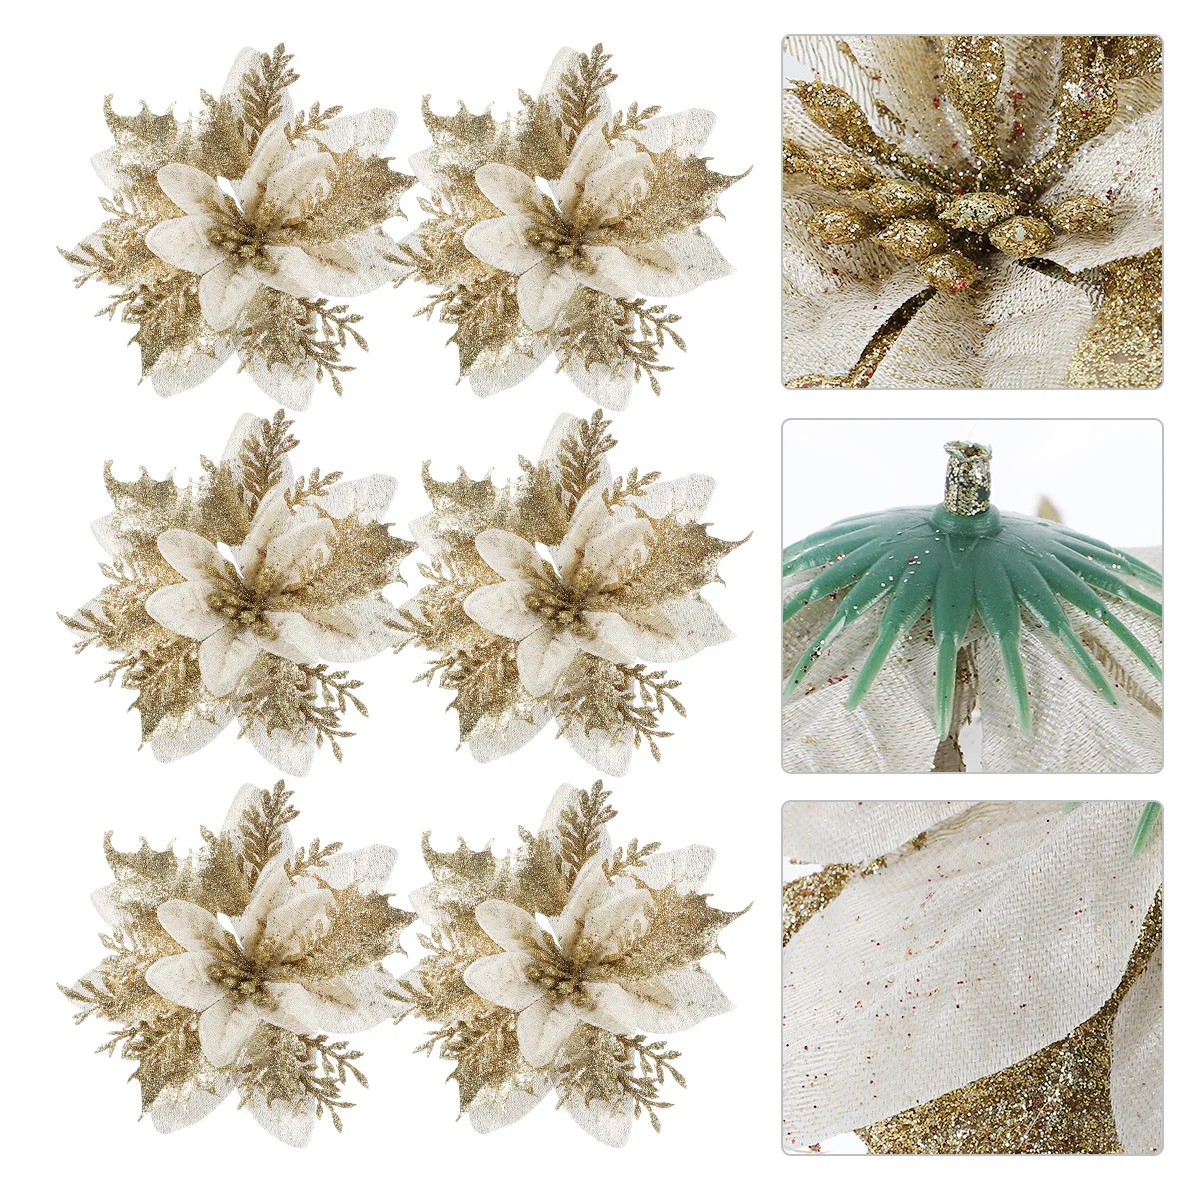 

12mm Christmas Flowers Christmas Tree Decorations Artifical Fake Flower Xmas Ornaments Navidad New Year Party Supplies